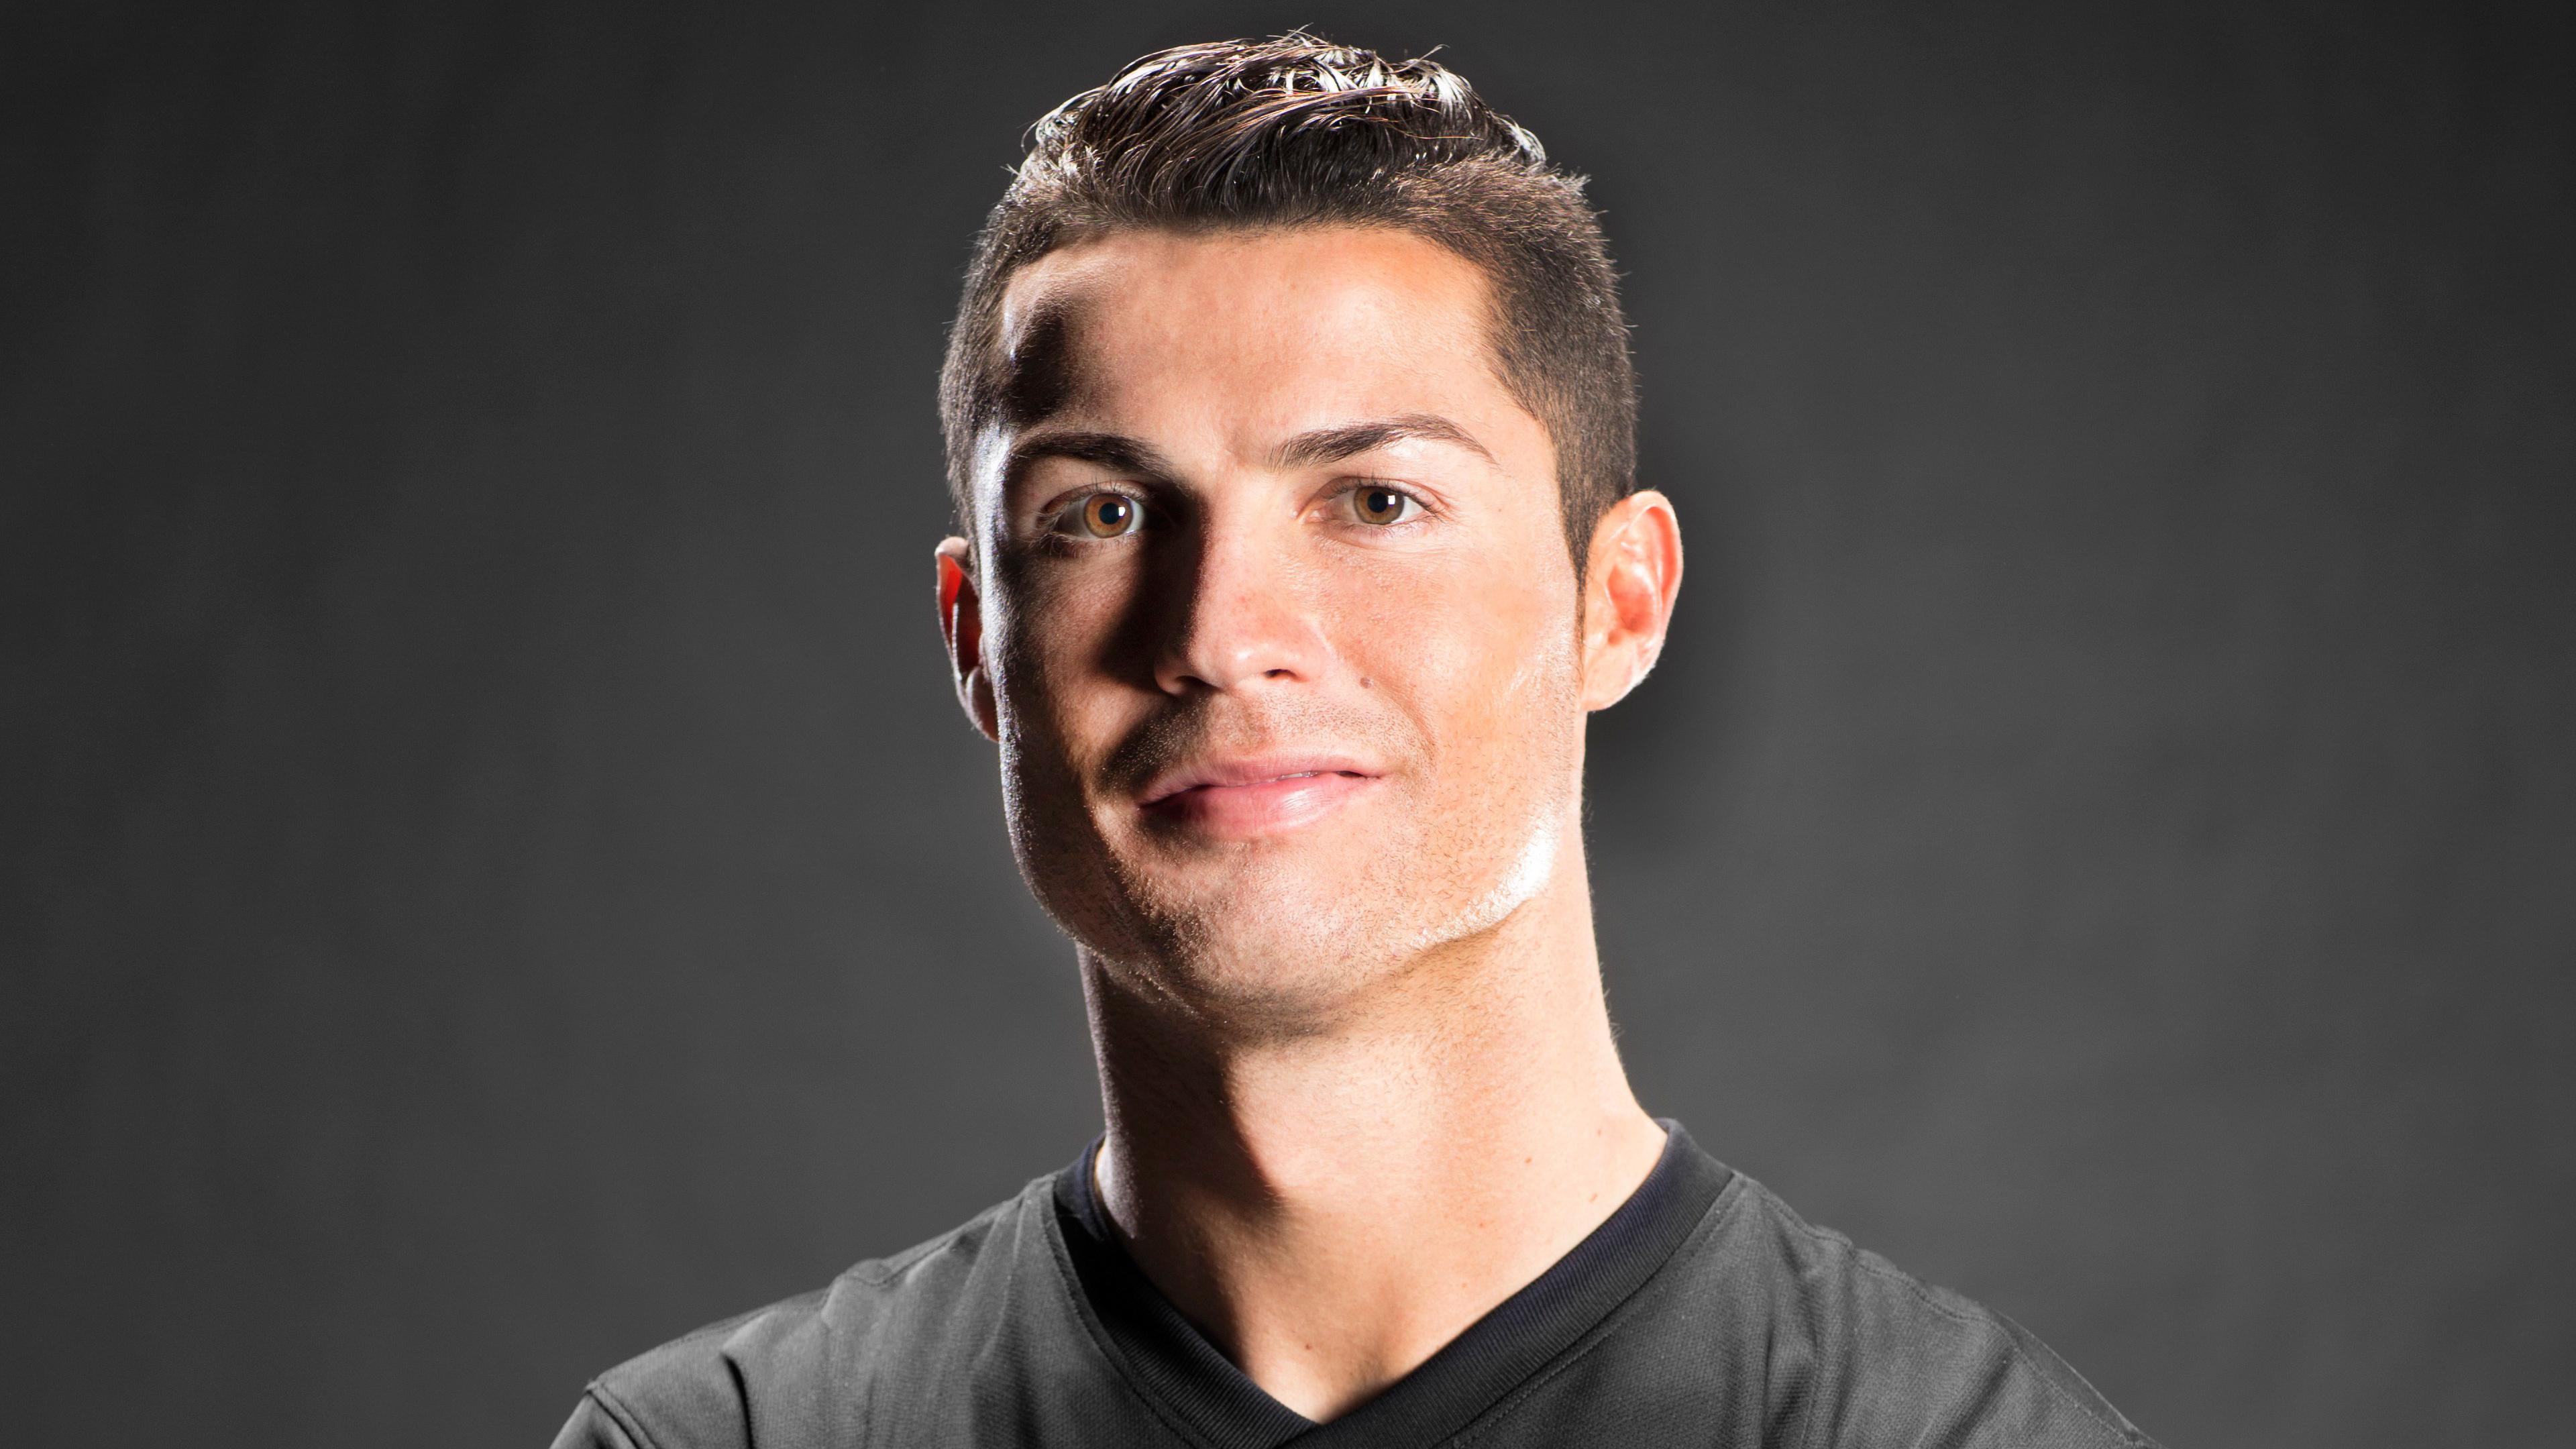 Cristiano Ronaldo 4k New, HD Sports, 4k Wallpapers, Images, Backgrounds